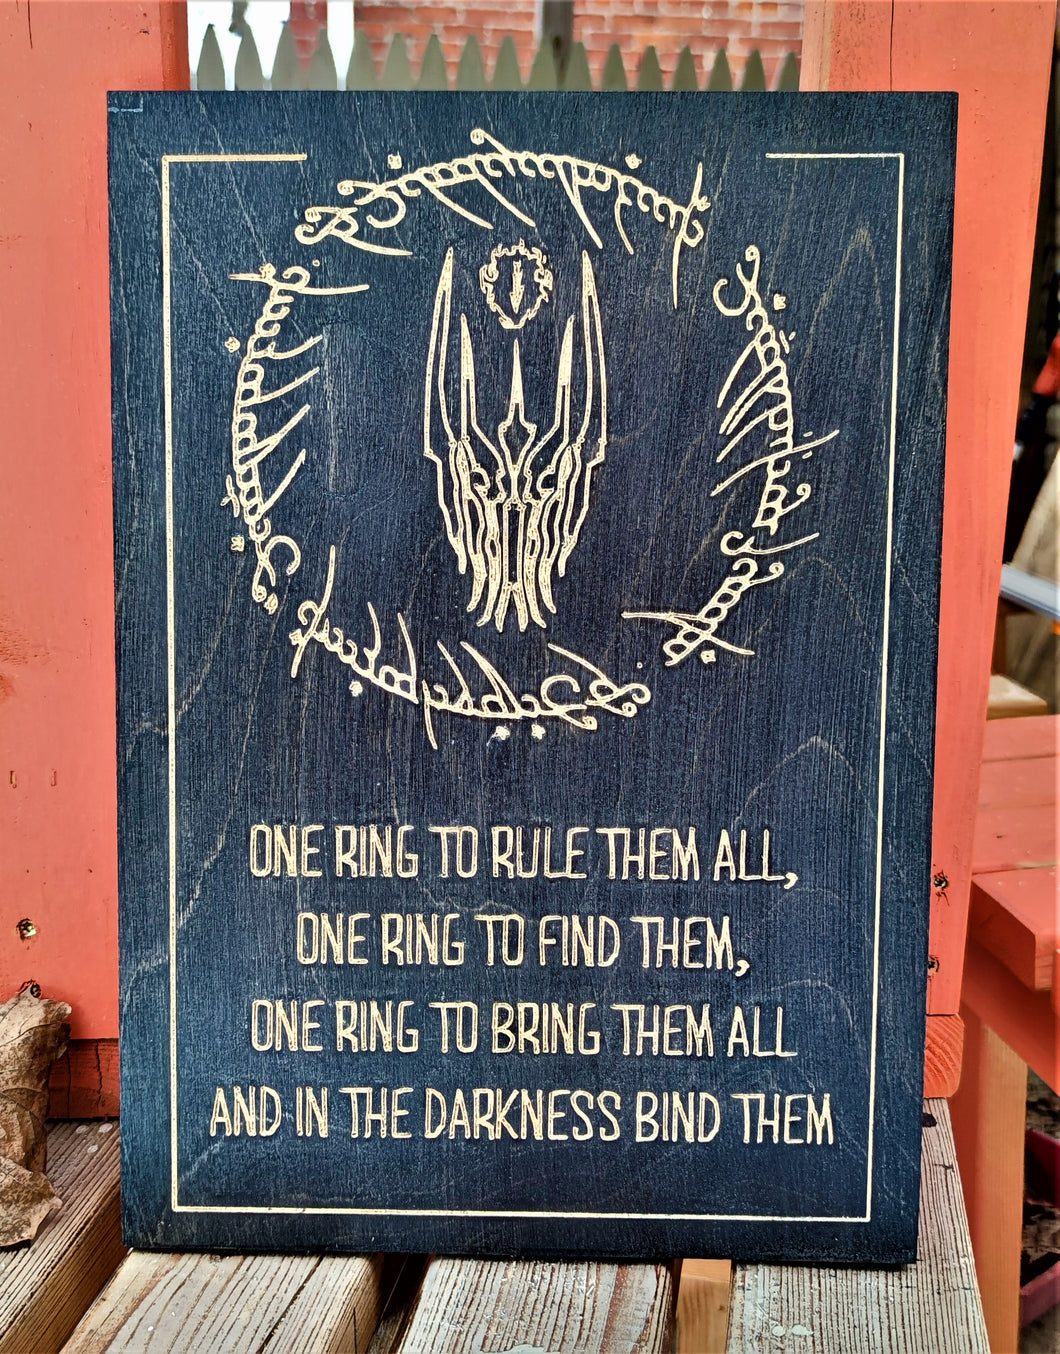 One Ring to Rule Them All: A Lord of the Rings Tattoo with a Twist